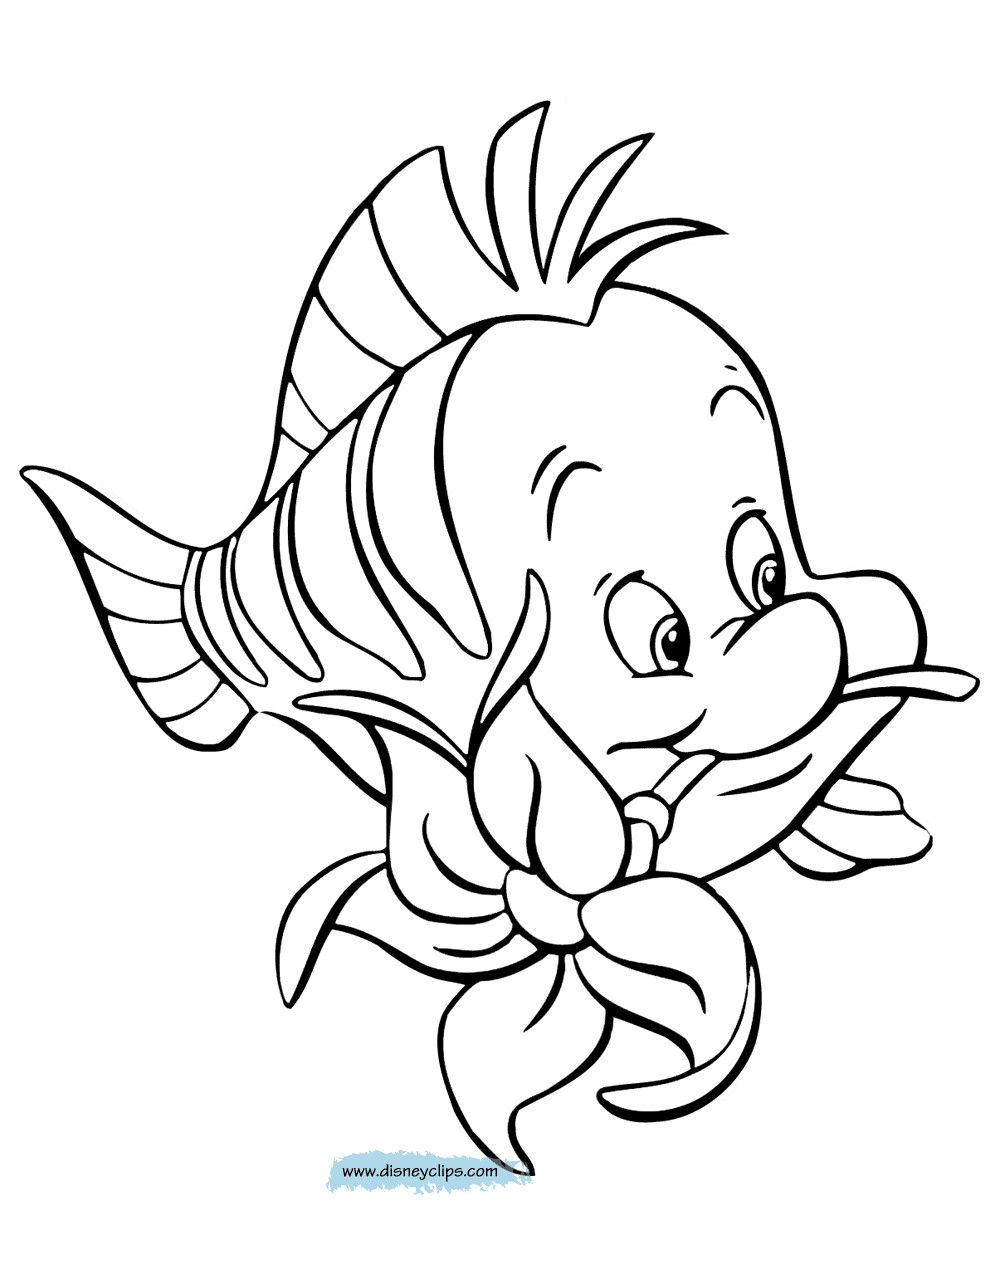 Flounder Coloring Pages
 Top Little Mermaid Flounder Coloring Pages Drawing Free